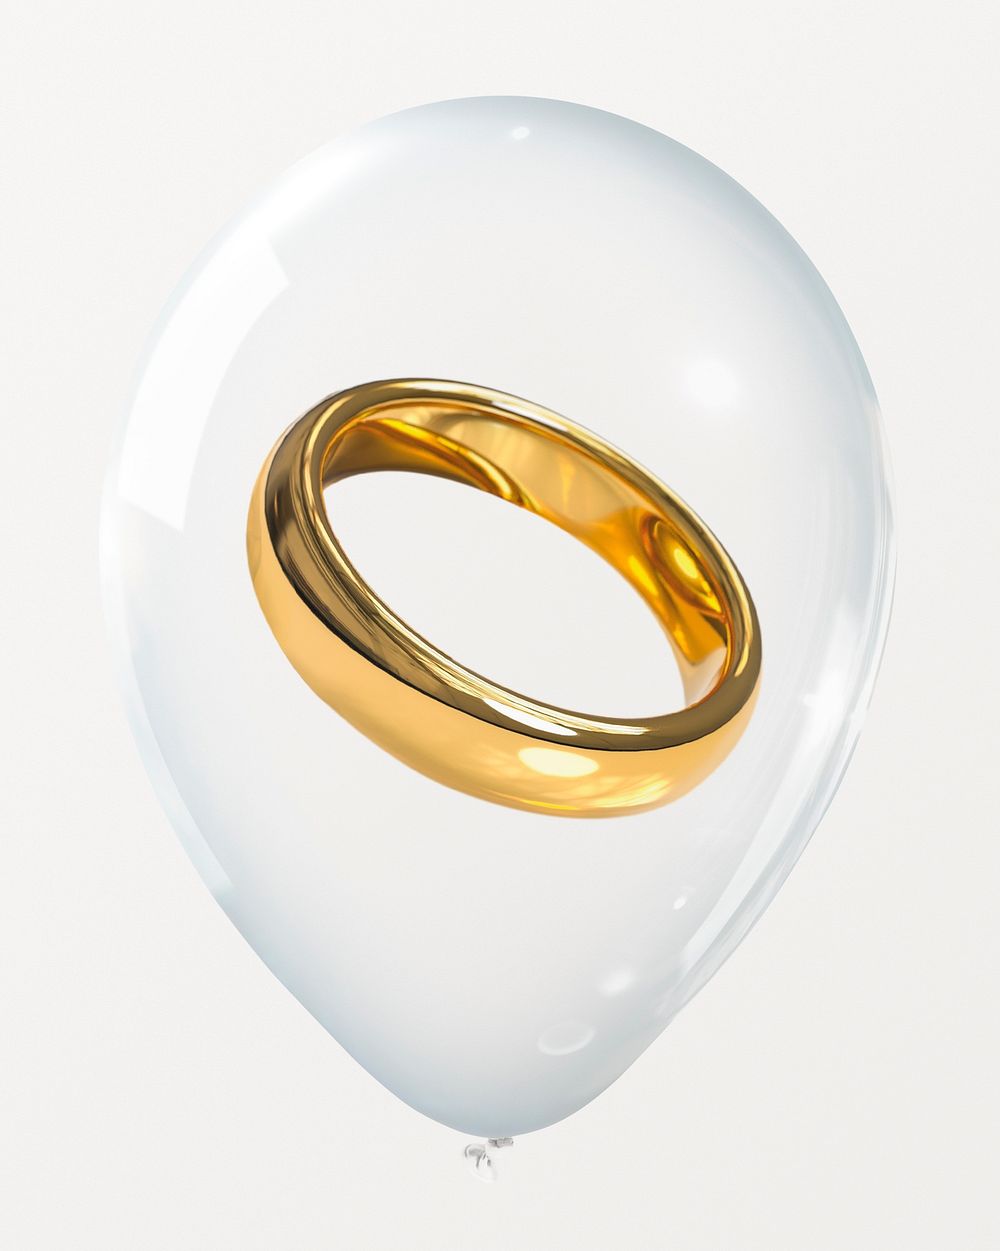 Golden ring in clear balloon, wedding concept